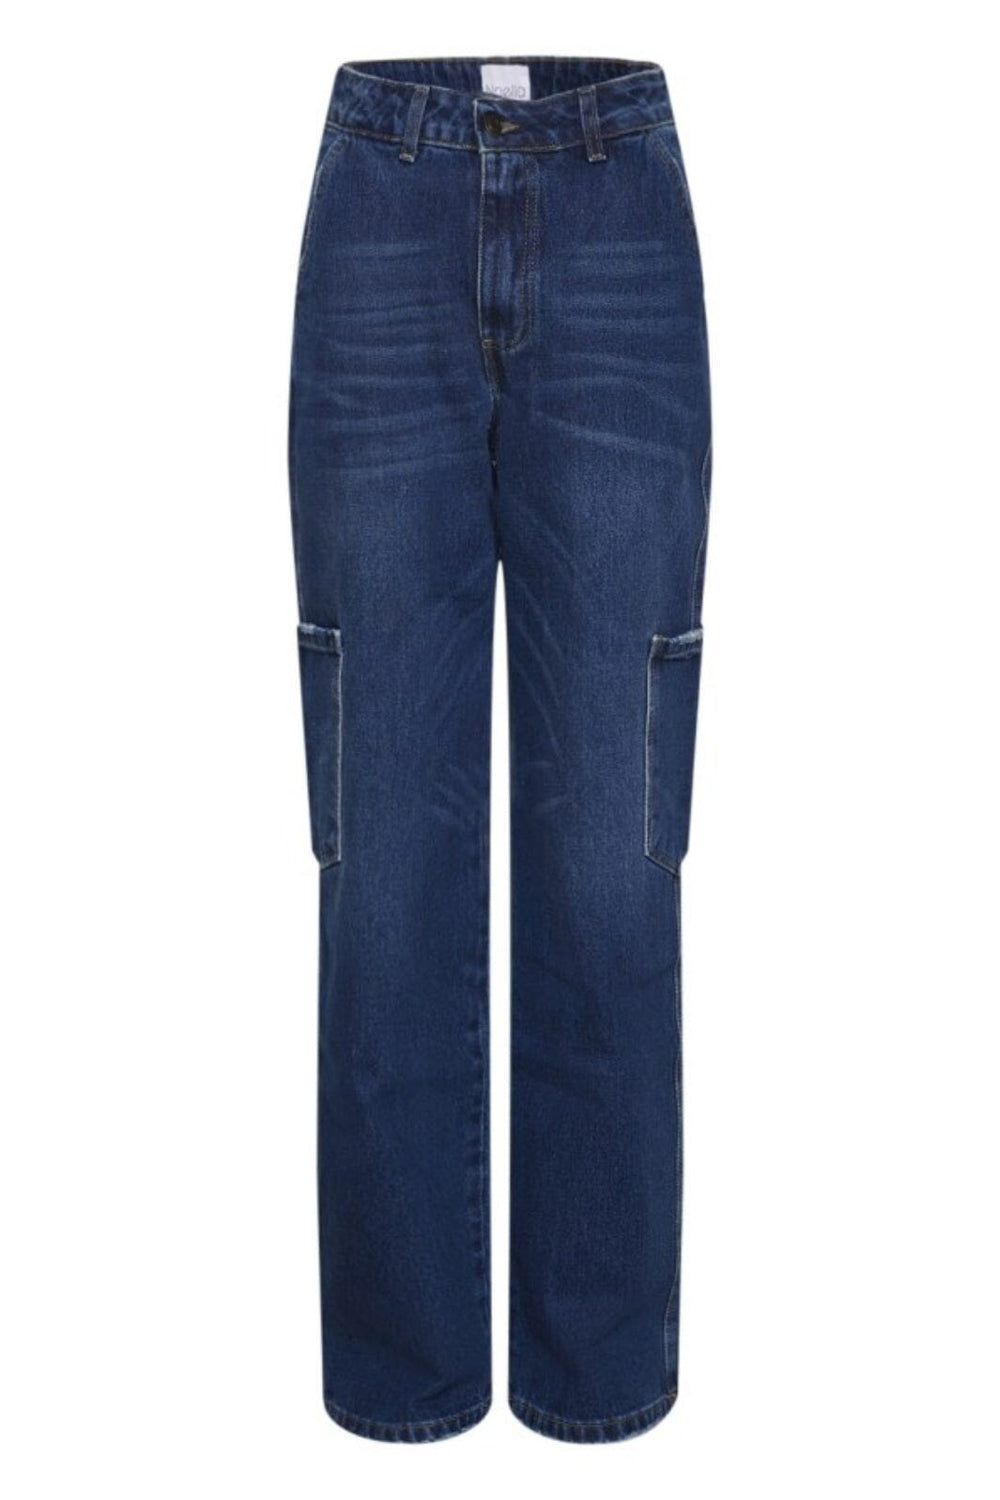 Noella - Rory Cargo Jeans - 188 Dark Blue Washed Jeans 